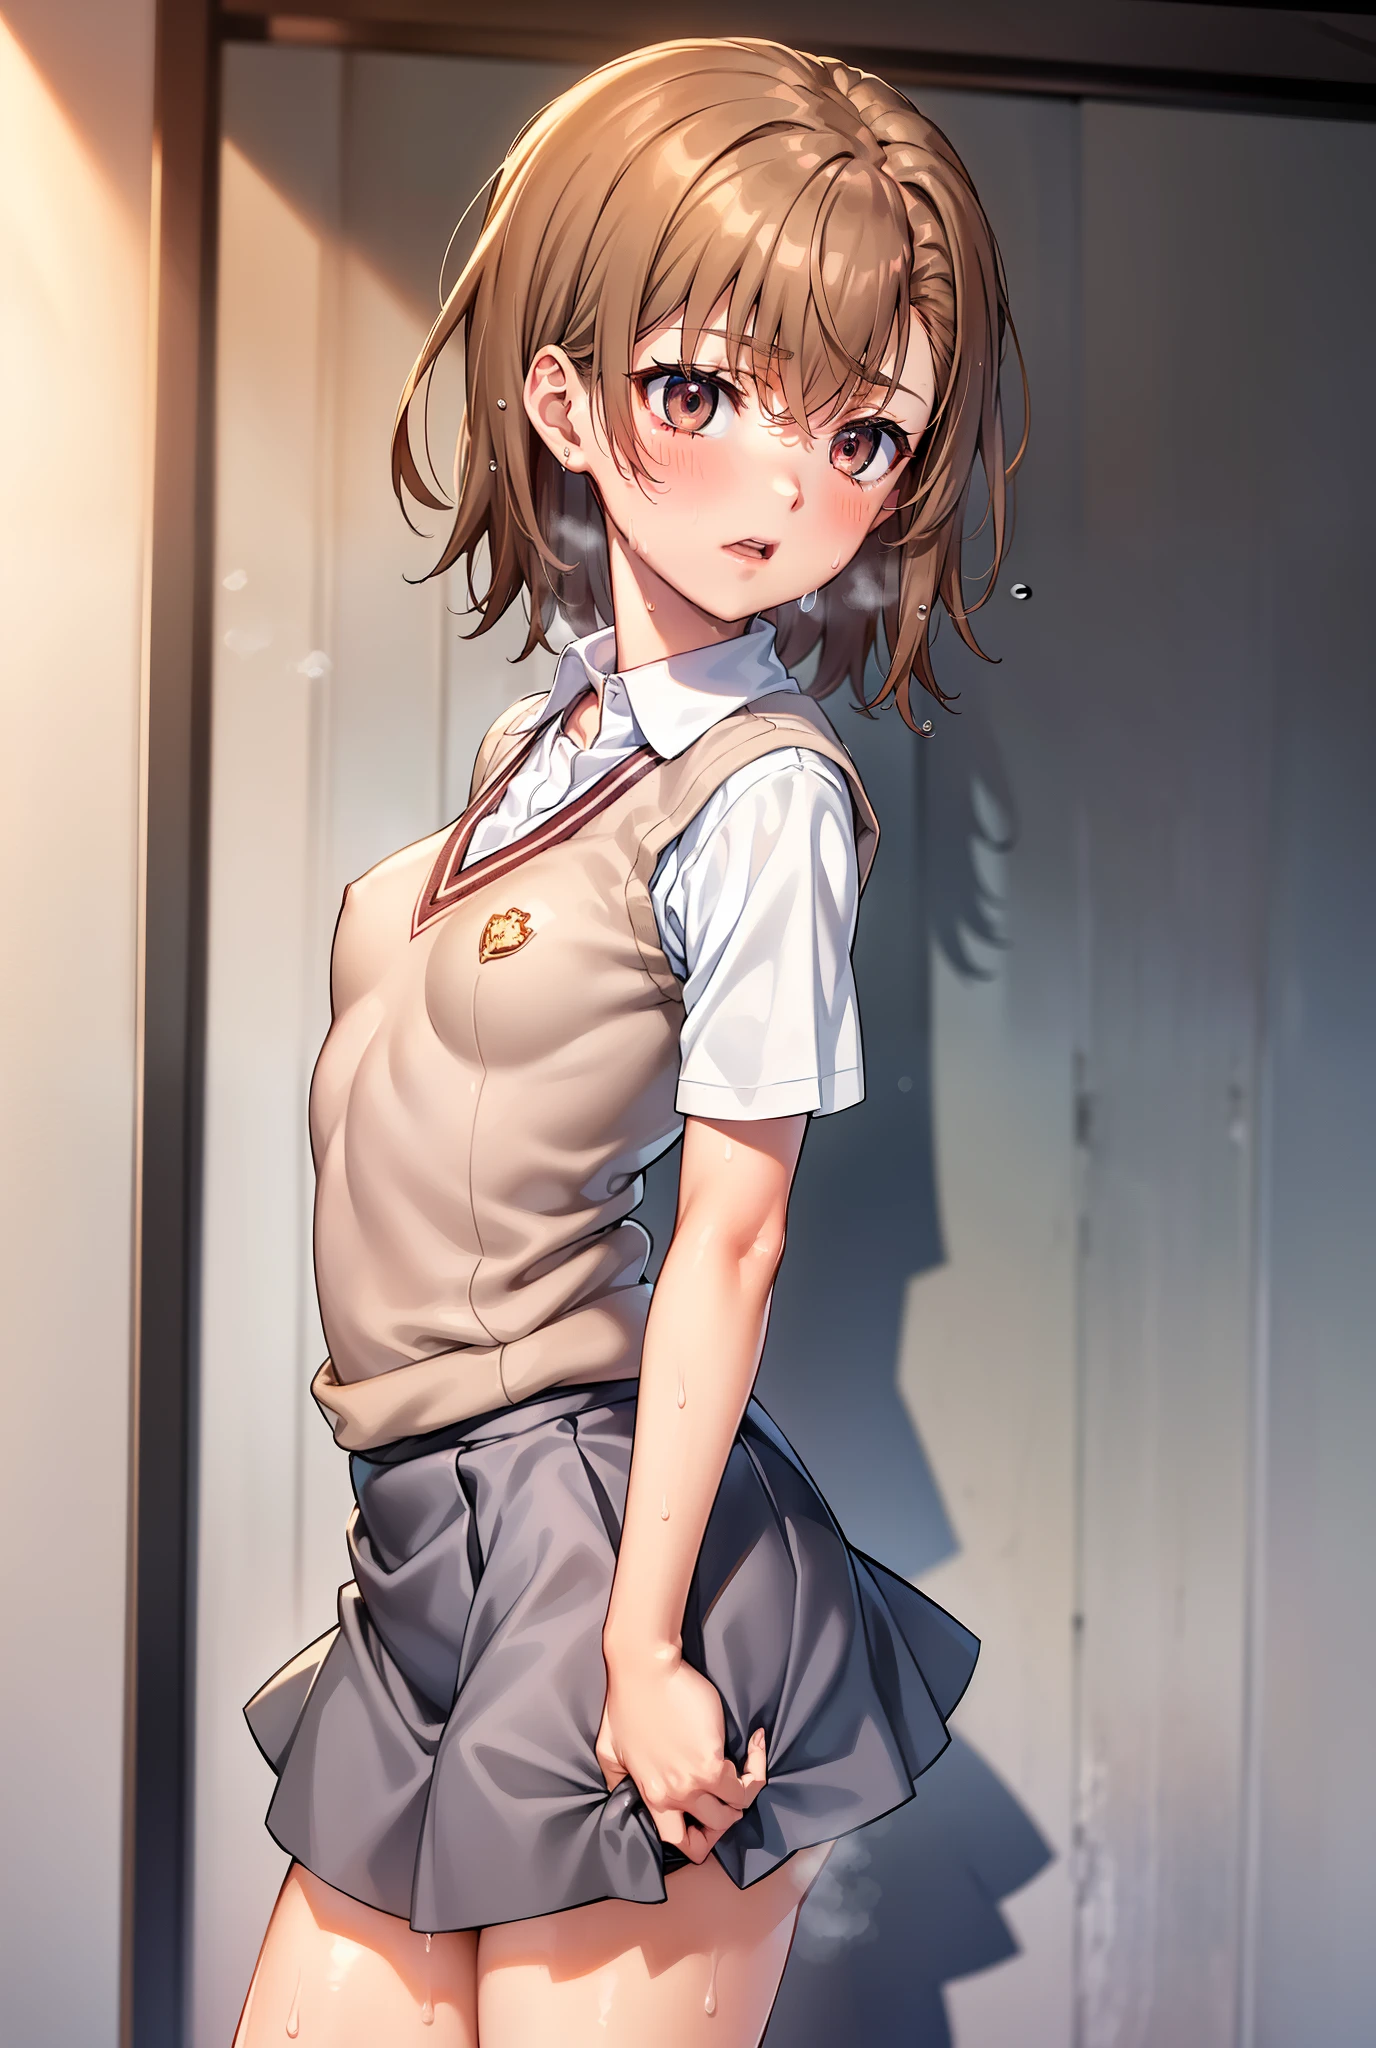 Smooth anime CG art、Focus Only、1 girl、View from the side、(((Grey Skirt)))、Sweater vest、Short sleeve、(((Small breasts)))、(((sweat)))、Semi-short hair、(((Sweaty)))、Watery eye、blush、(((Embarrassed look)))、((Open your mouth))、(((Are standing)))、((indoor))